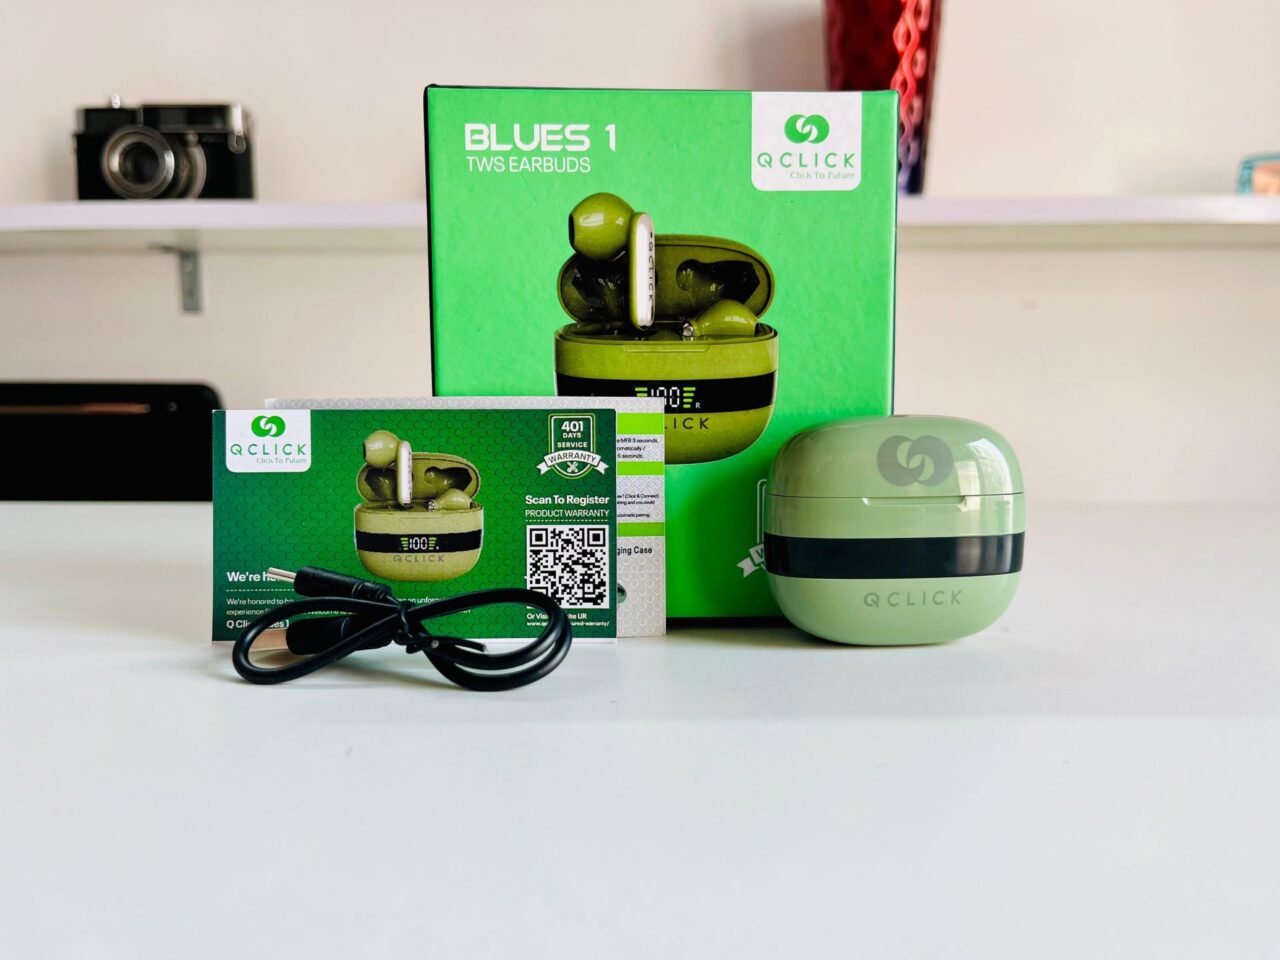 Qclick Blues 1 TWS Earbuds Review